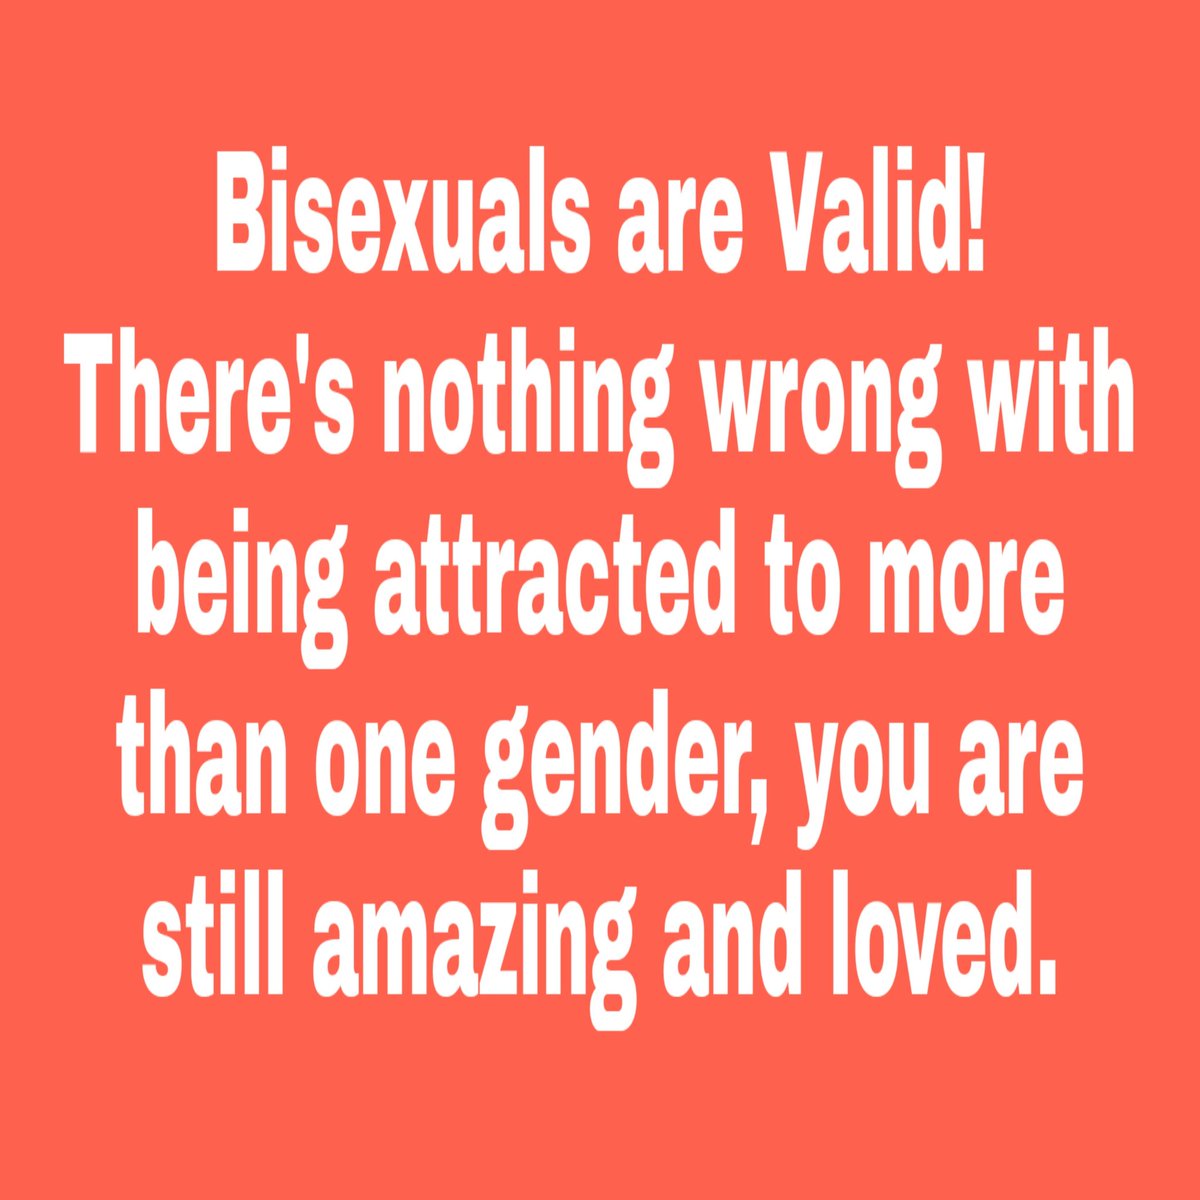  #KOH: Bisexuals are Awesome!